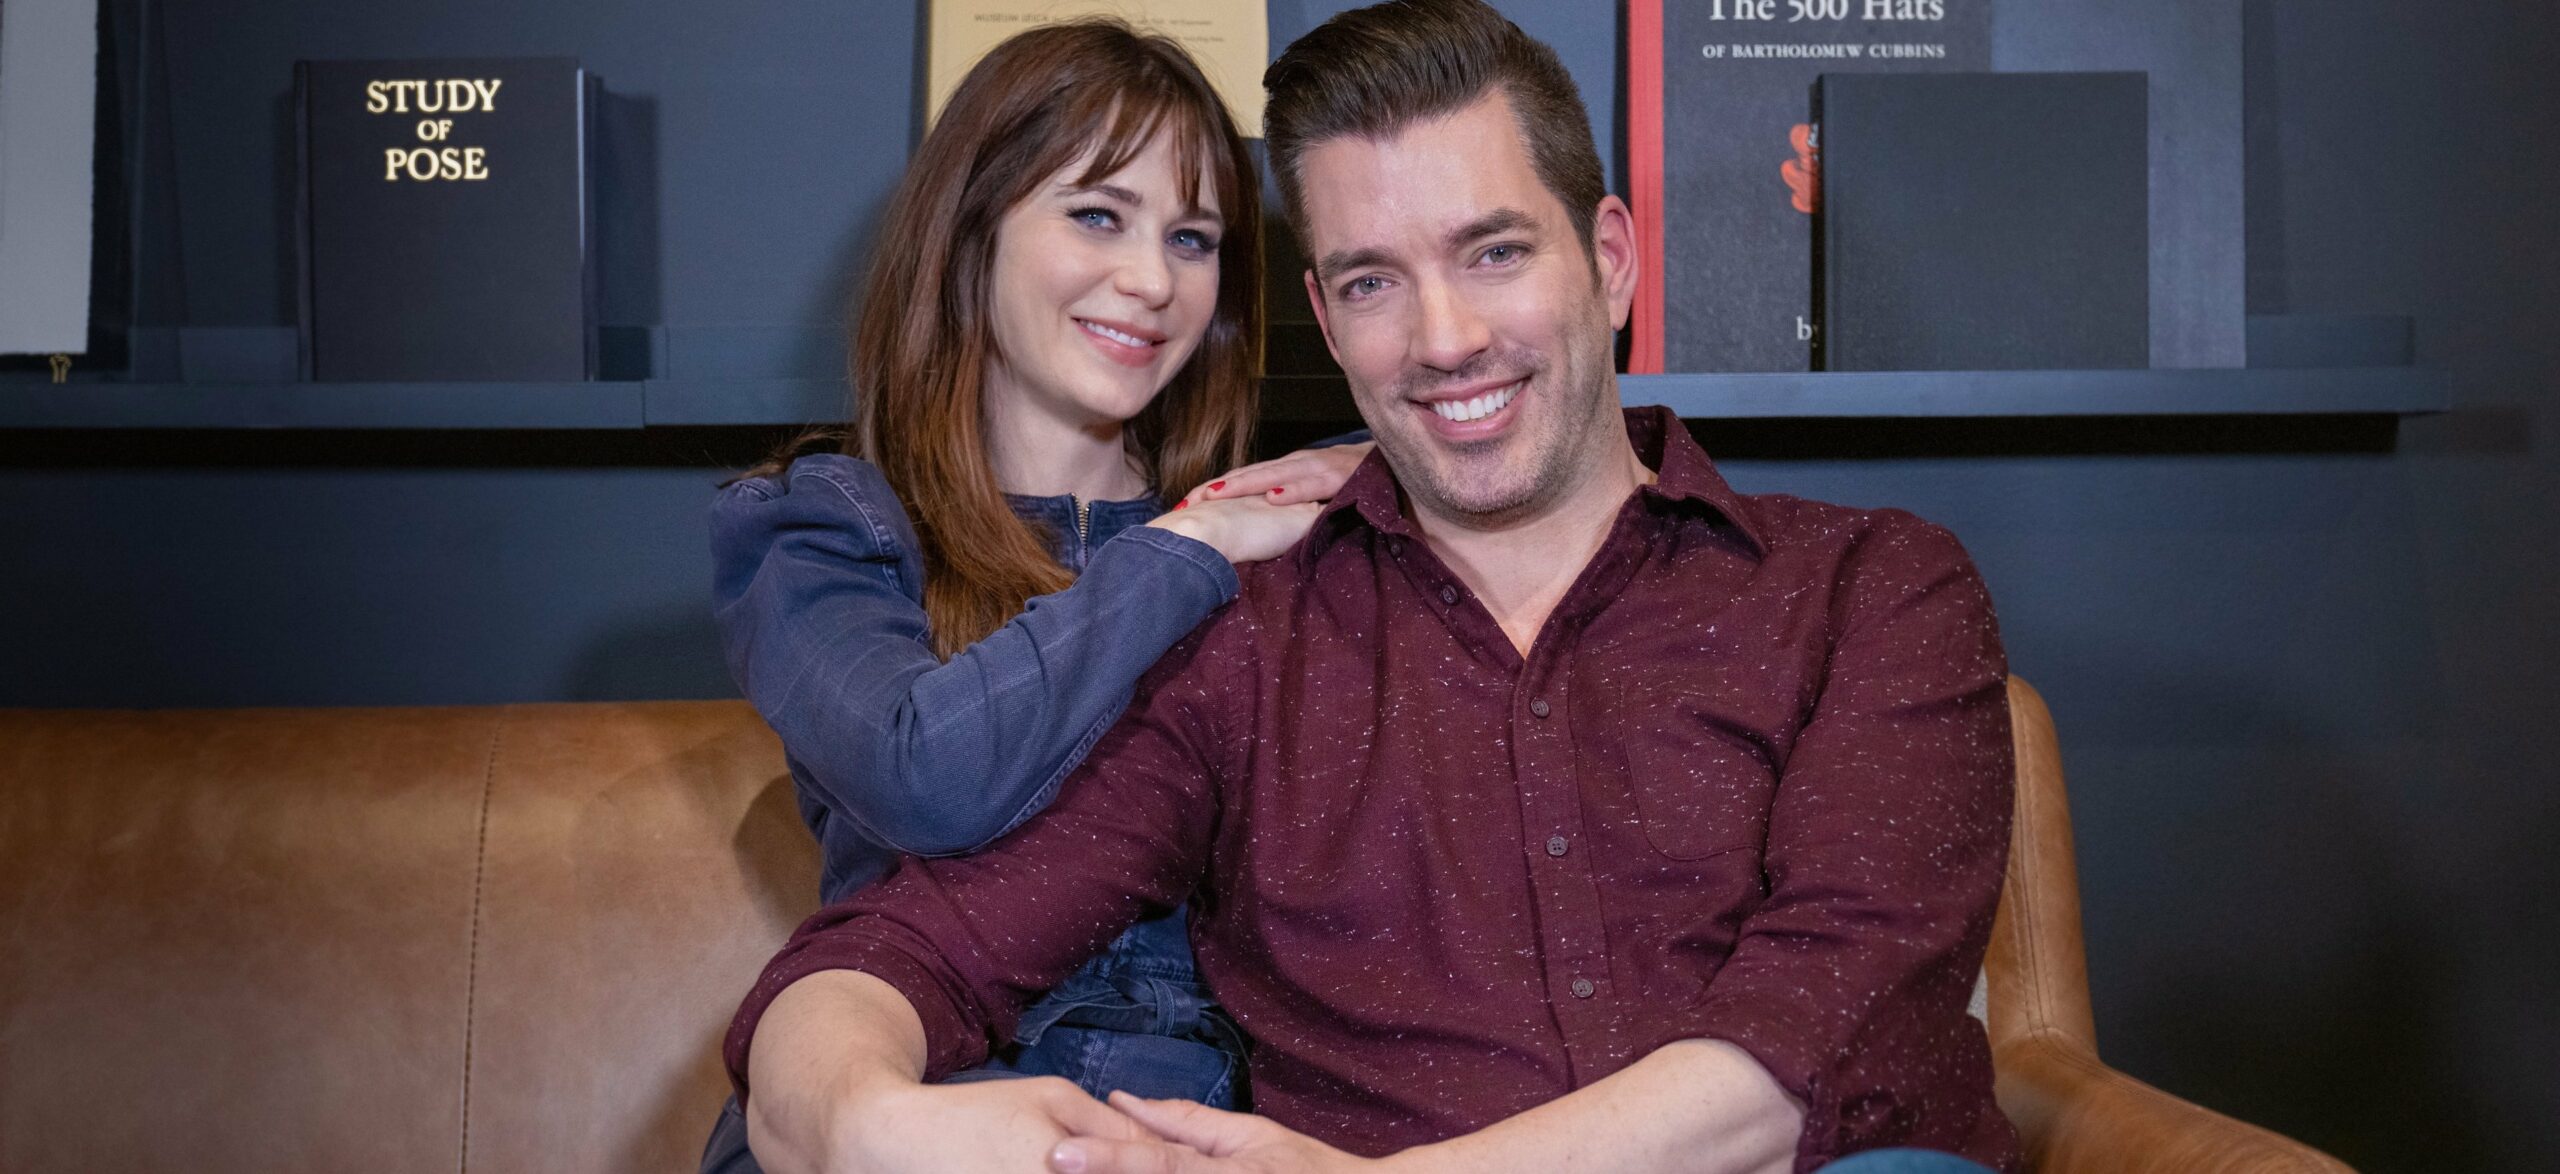 Are Zooey Deschanel and Jonathan Scott Still Together? How Did They Meet?